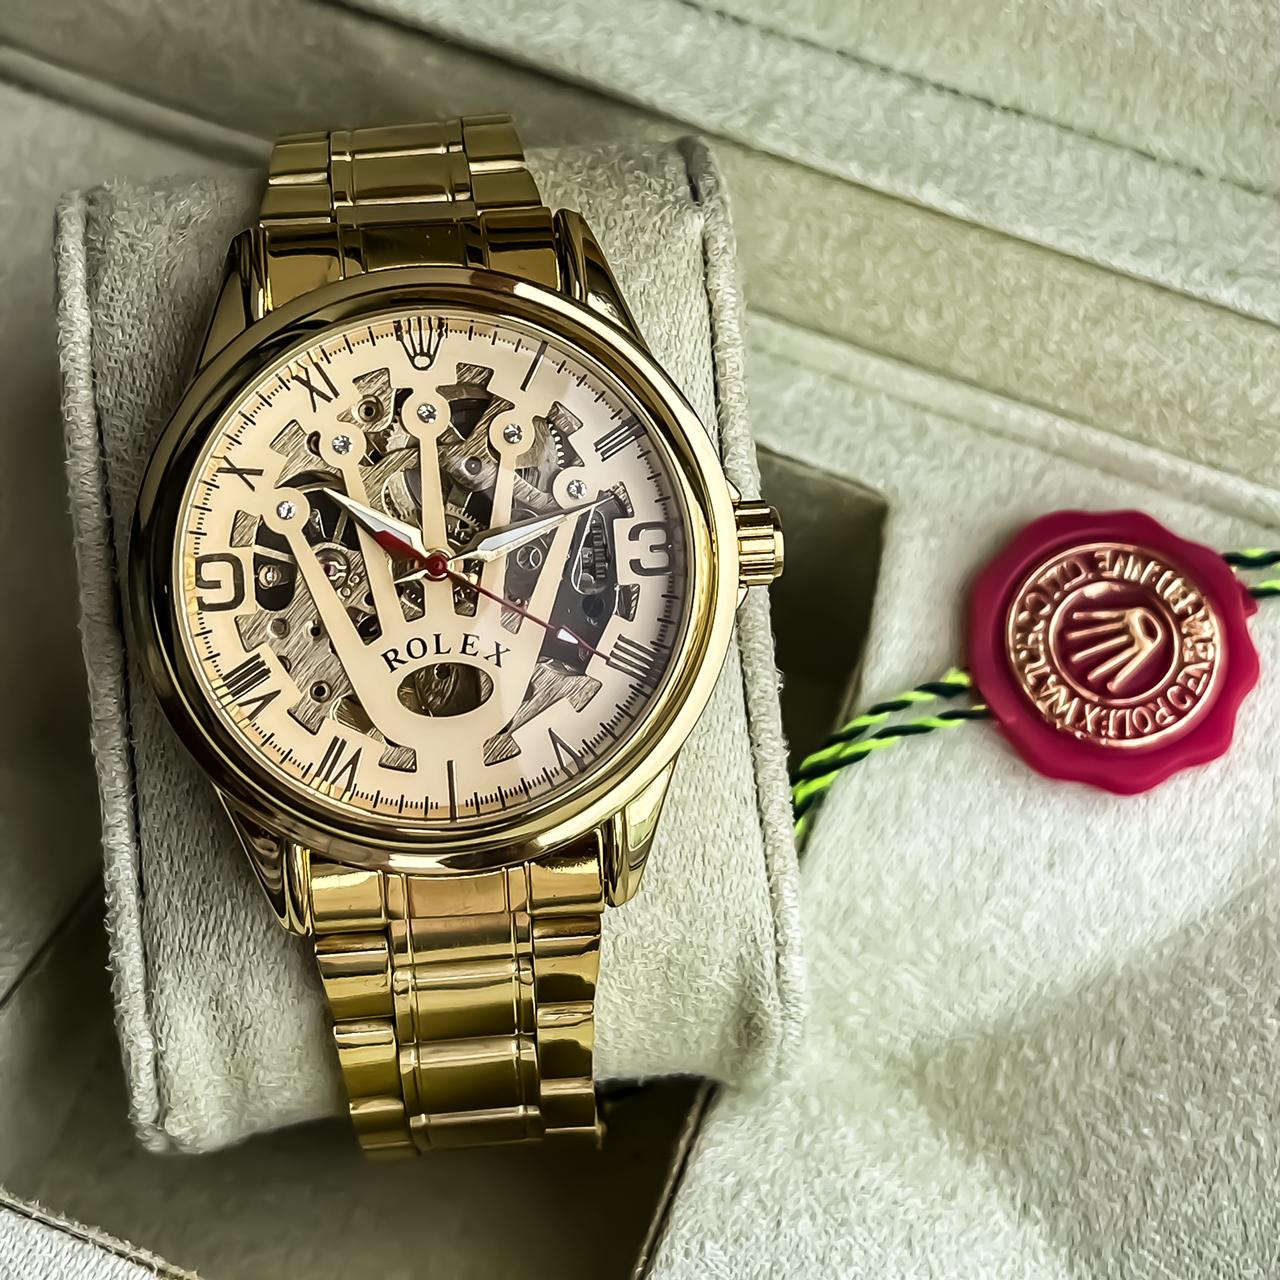 Branded Golden Automatic Watch On Sale